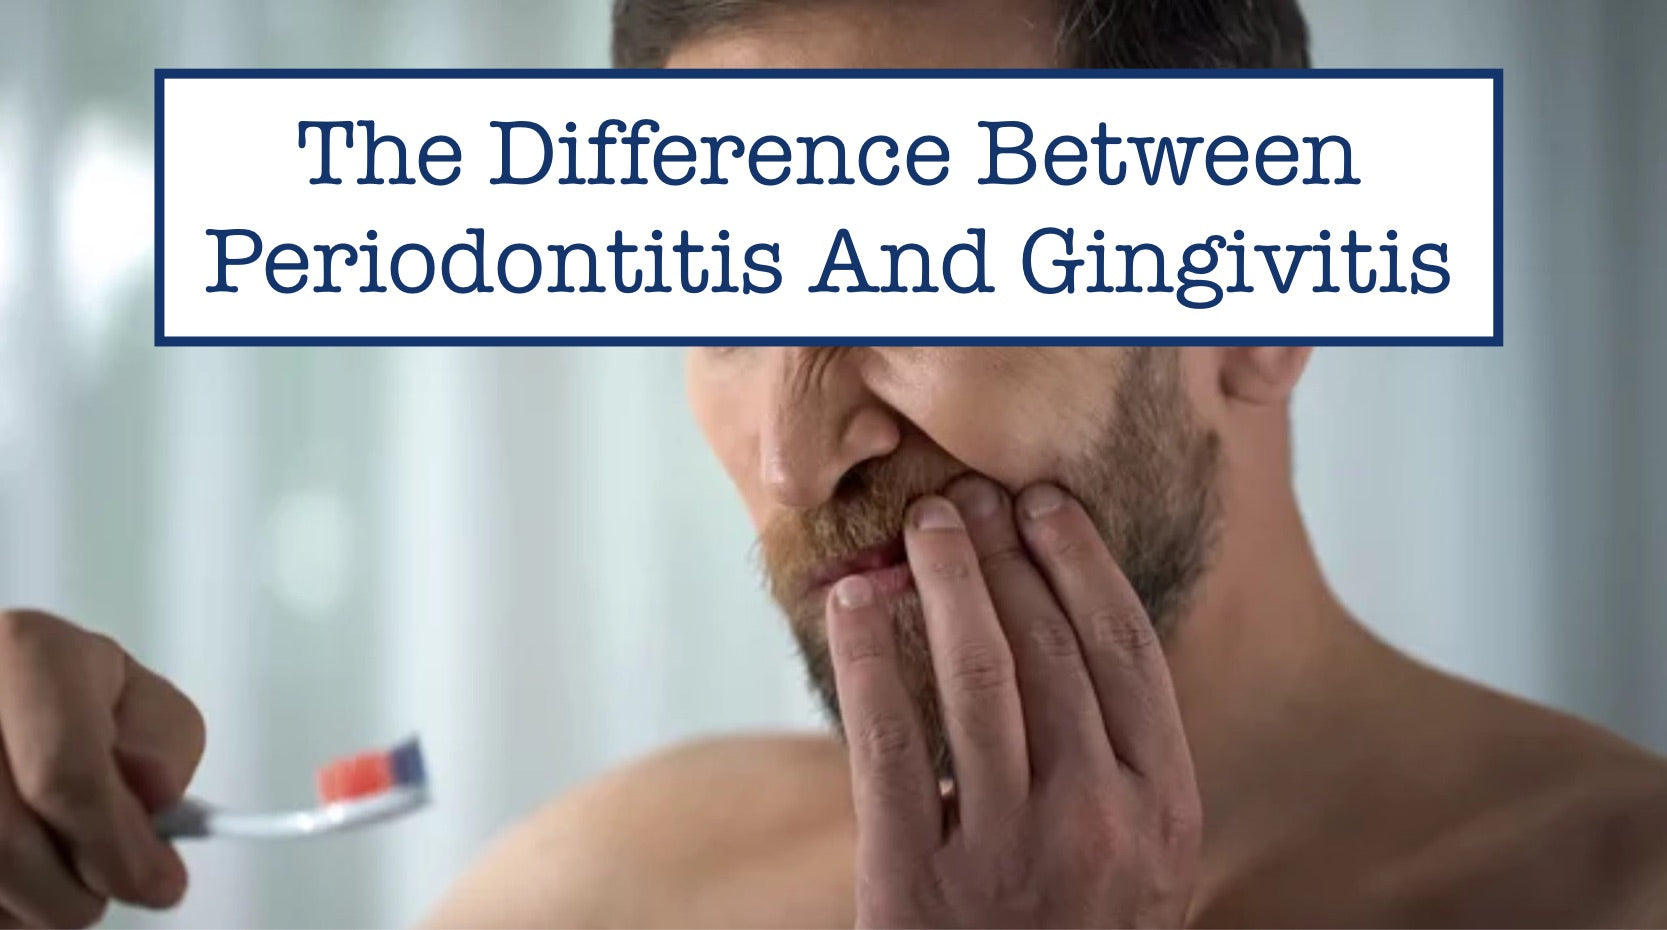 The Difference Between Periodontitis And Gingivitis